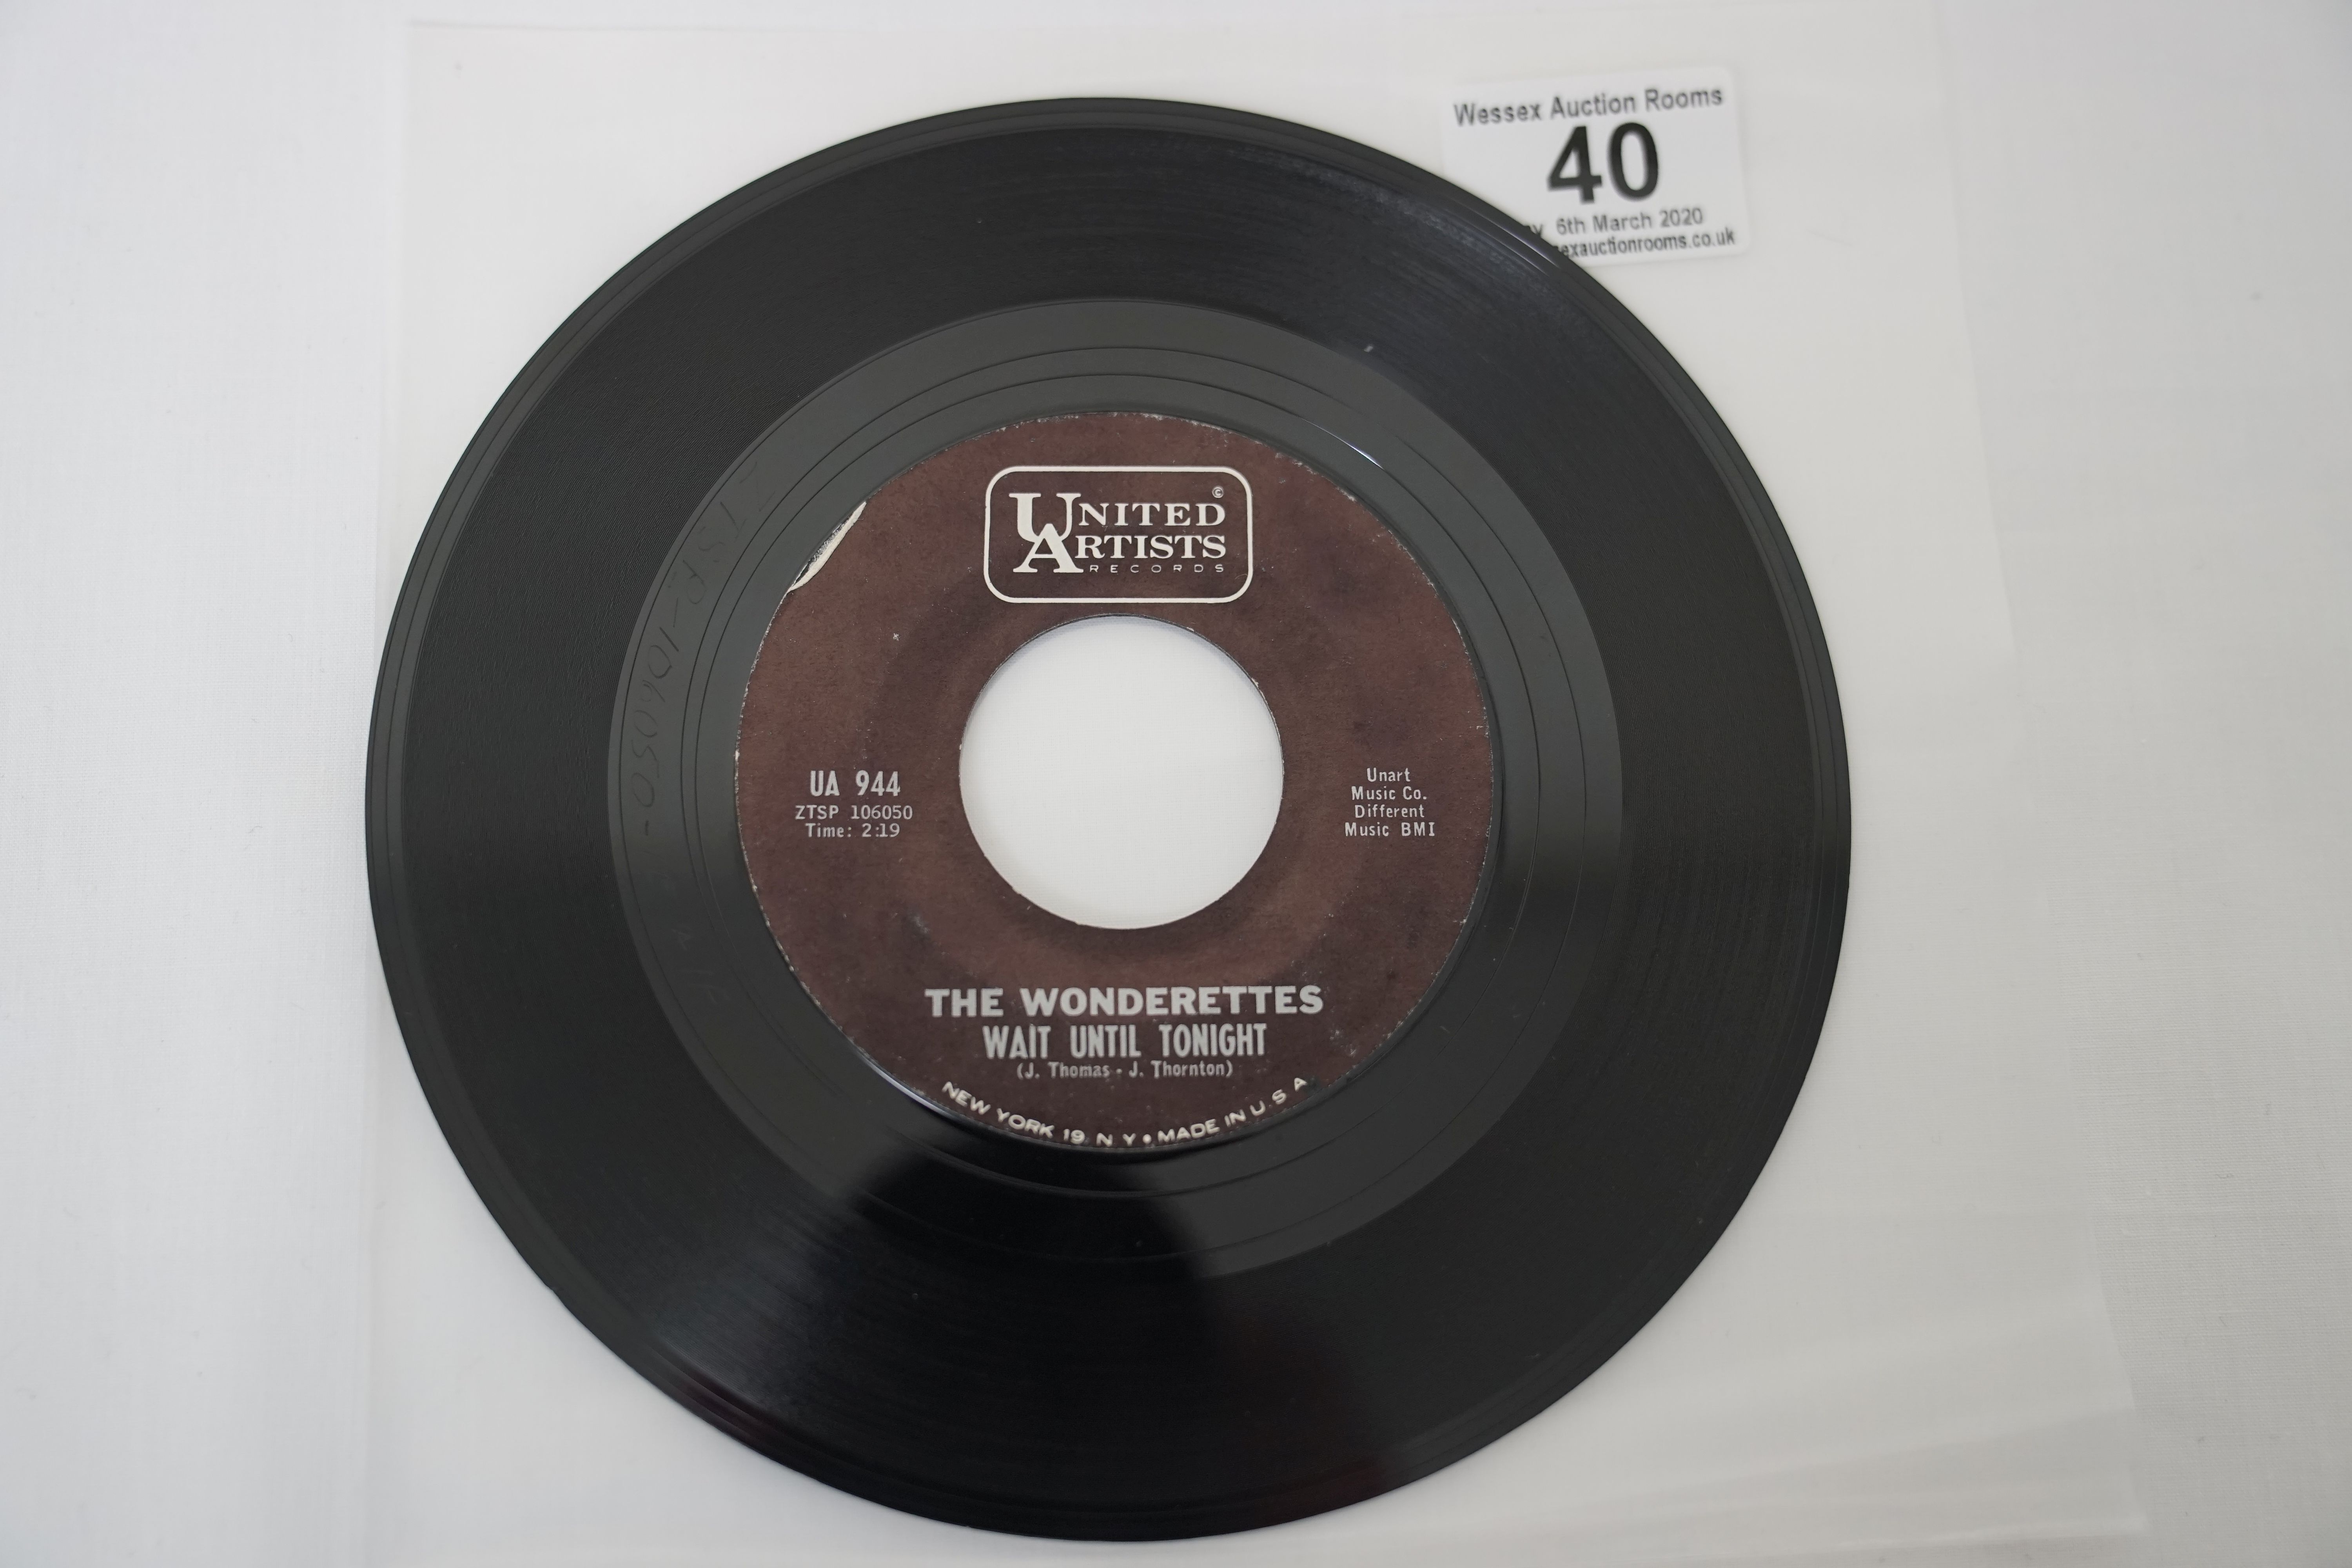 4 rare original US 1st pressing Northern Soul stock copies on United Artists Records. The - Image 10 of 17